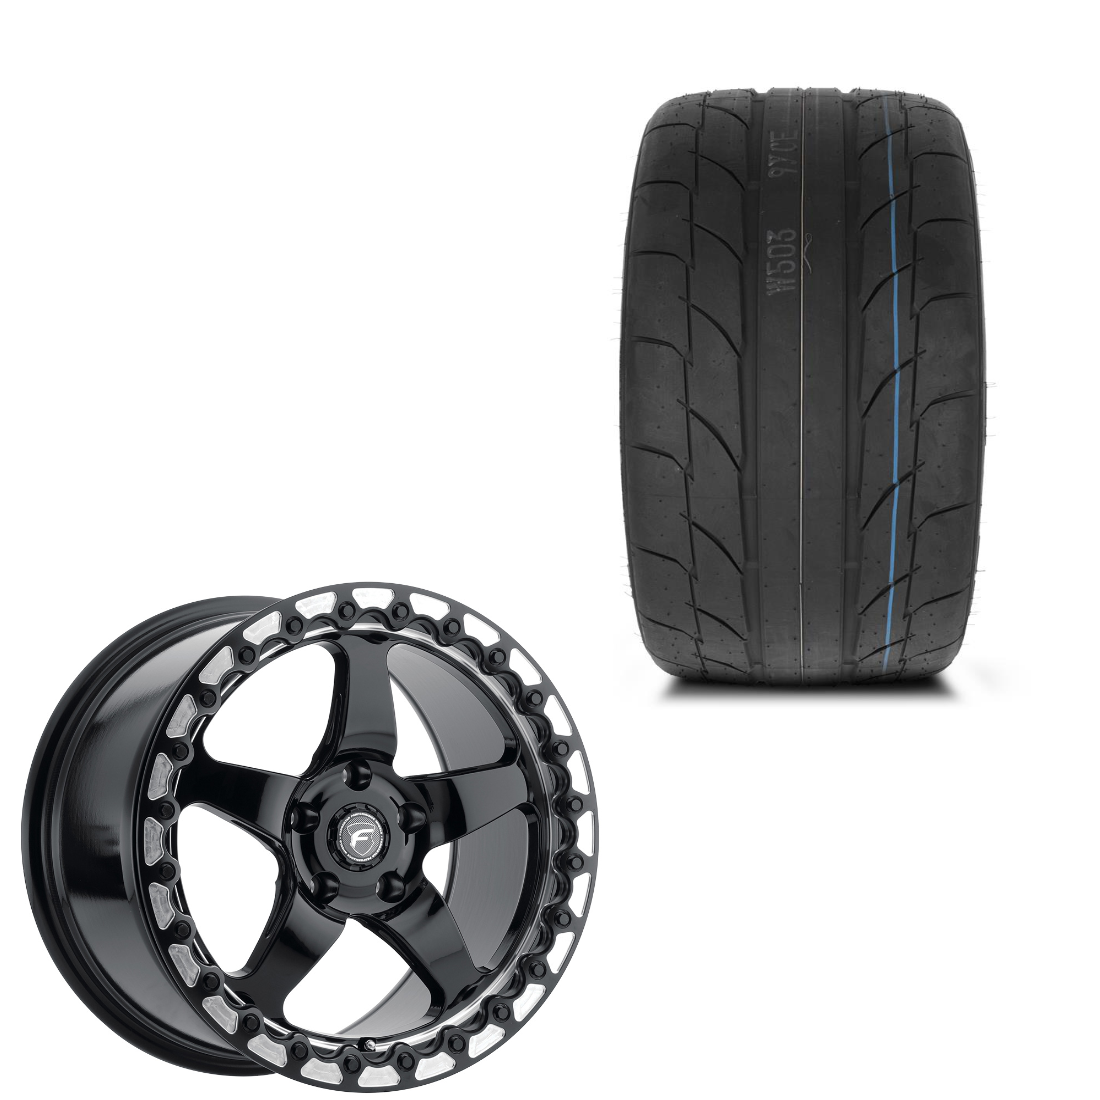 Forgestar Beadlock & Nitto Nt555 RII Wheel & Tire Combo Dodge Charger & Challenger